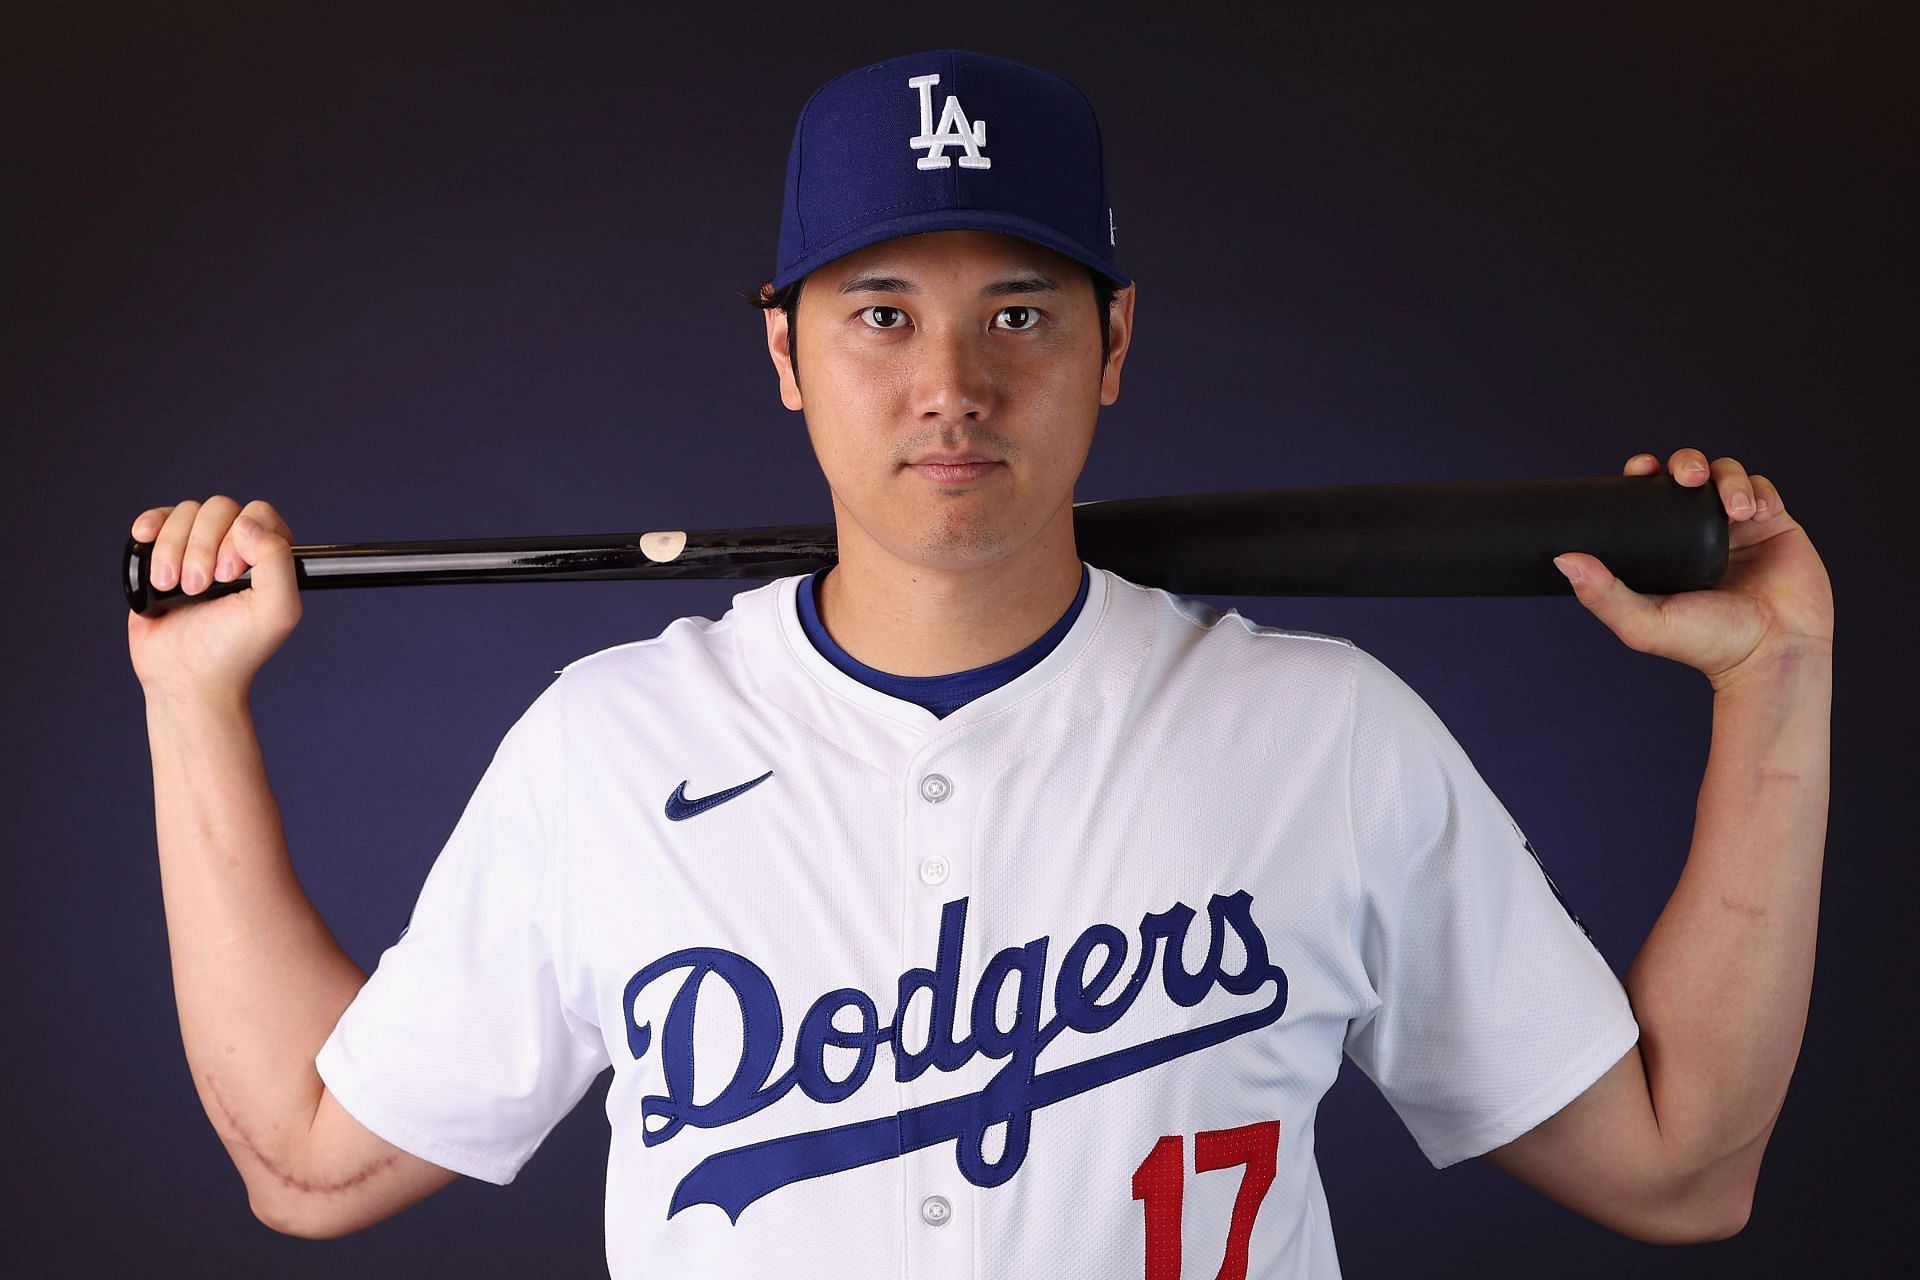 Ohtani showed off his power with a solid ground ball to the right side of Dodgers lefty Ryan Yarbrough during the practice